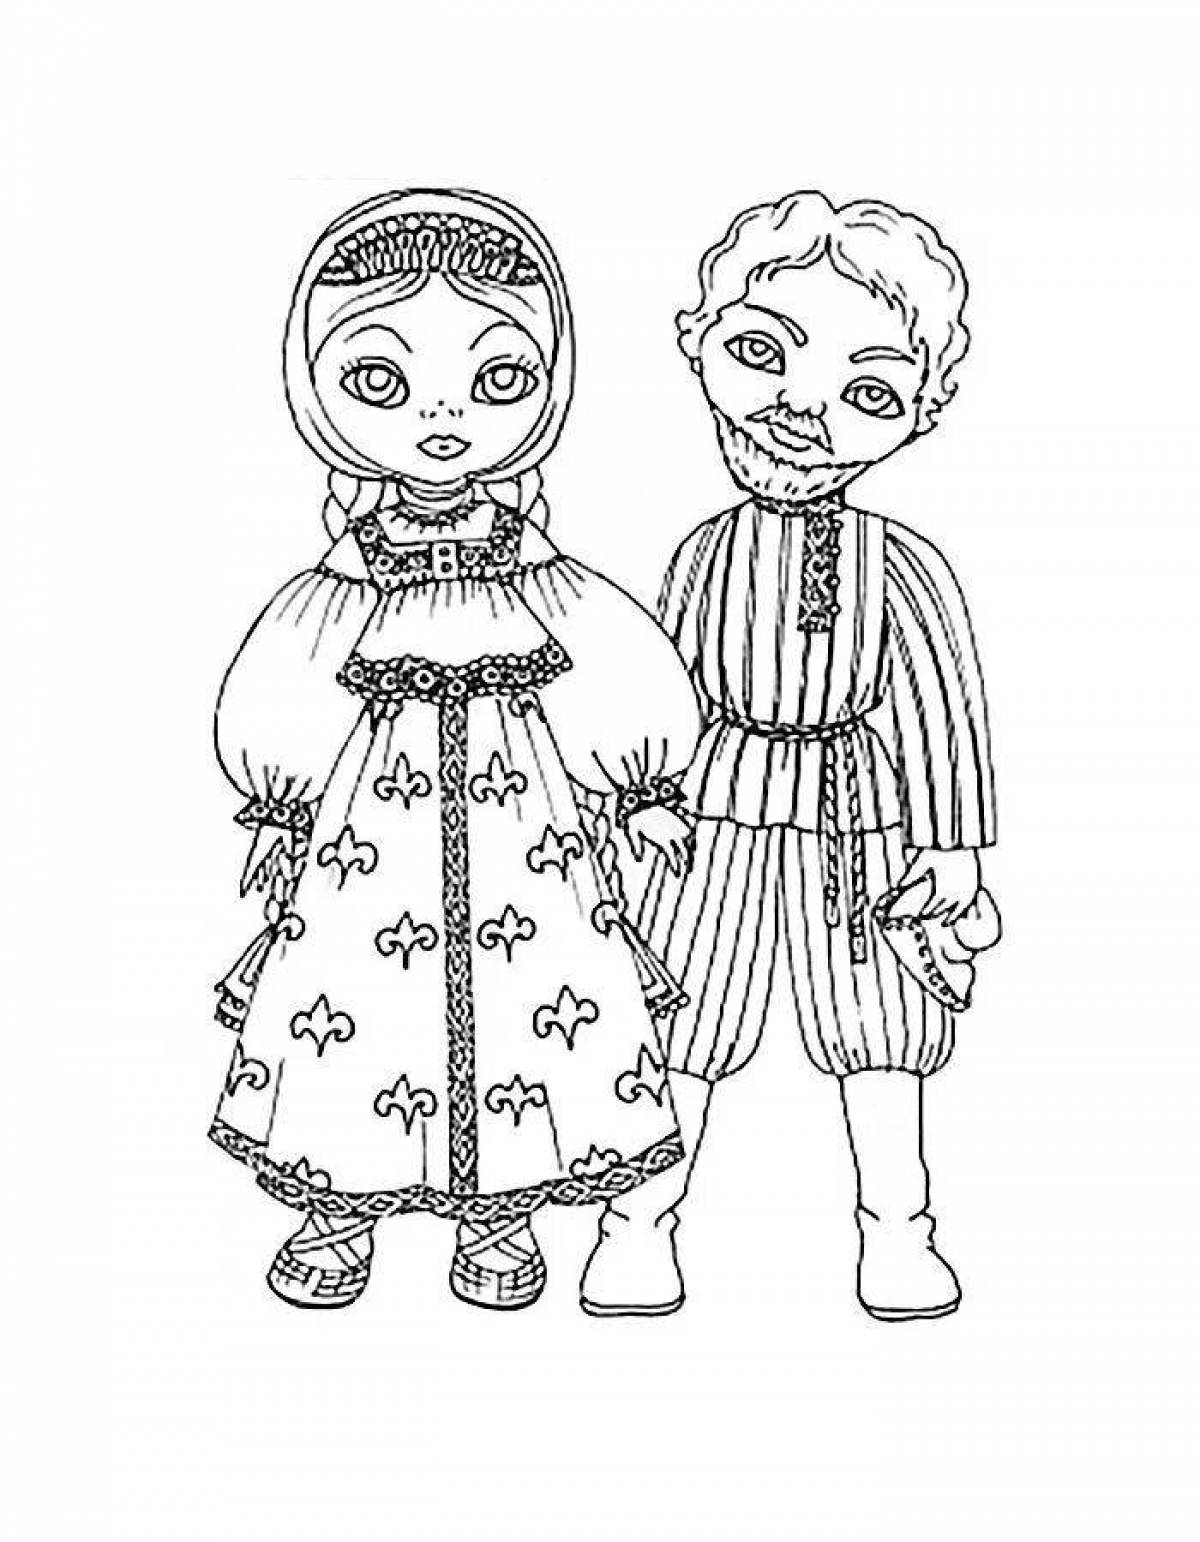 Shiny costume, national russia, coloring page